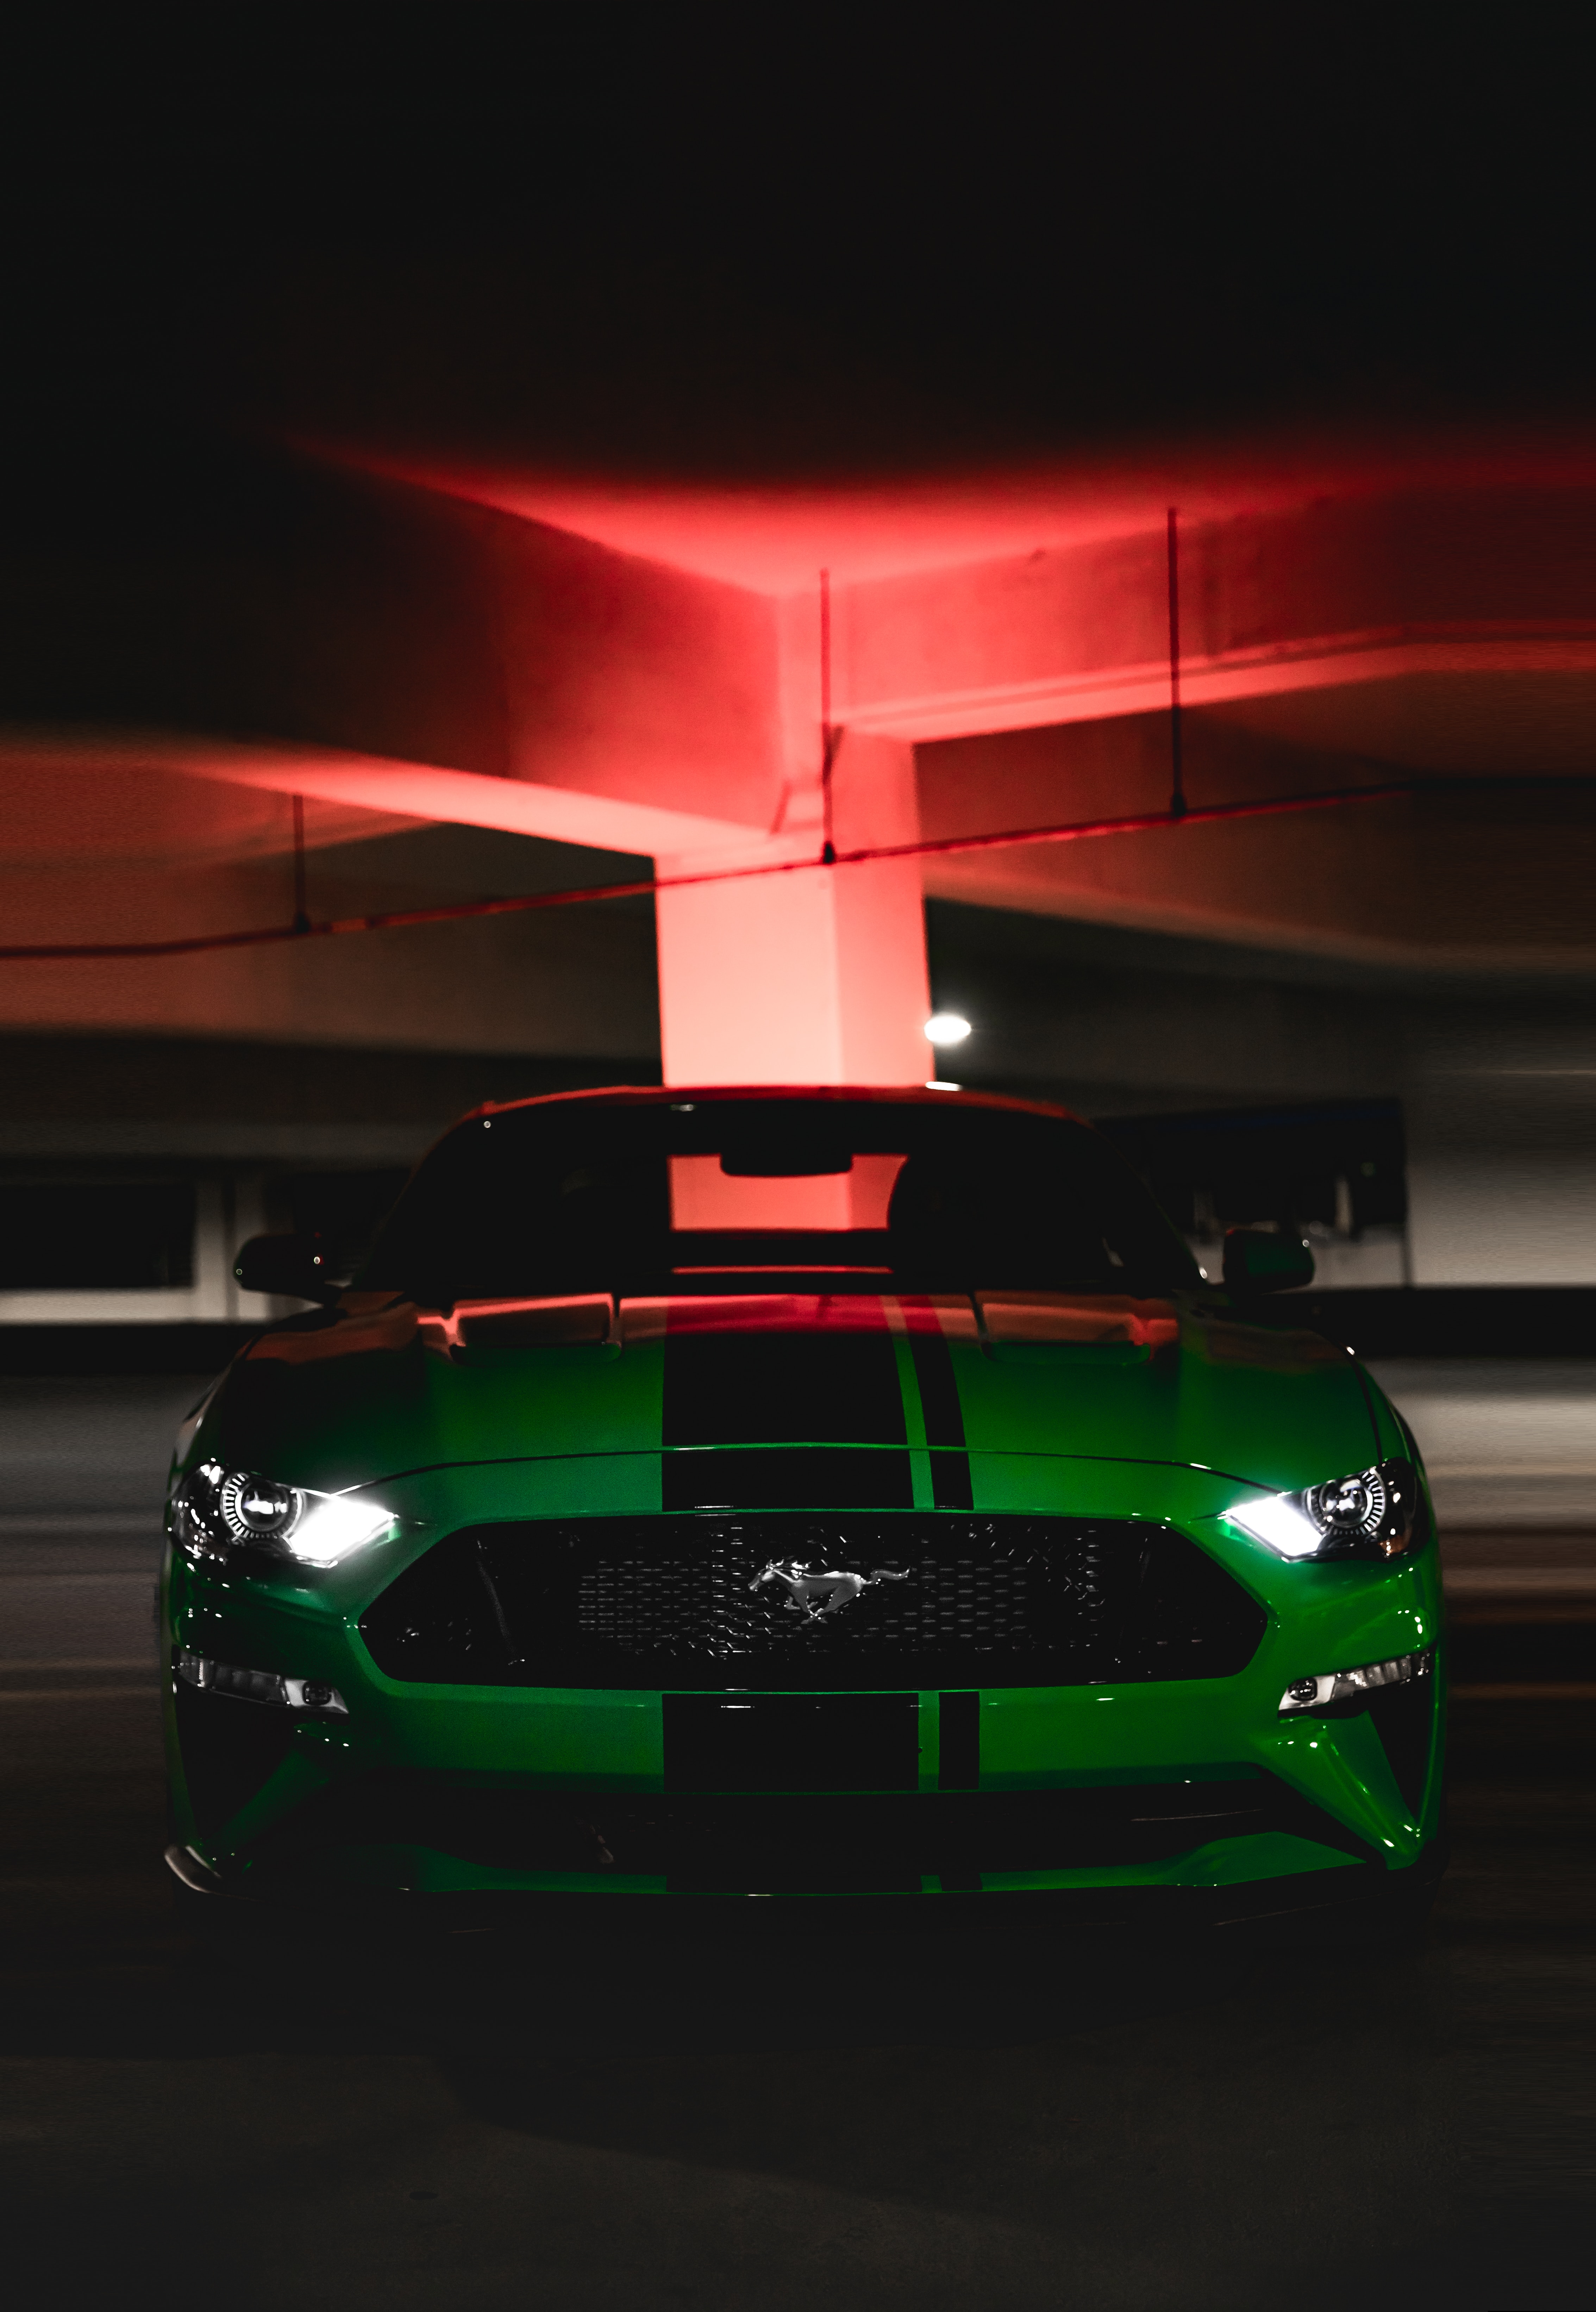 144318 download wallpaper ford mustang, ford, cars, green, dark, car, front view, machine screensavers and pictures for free